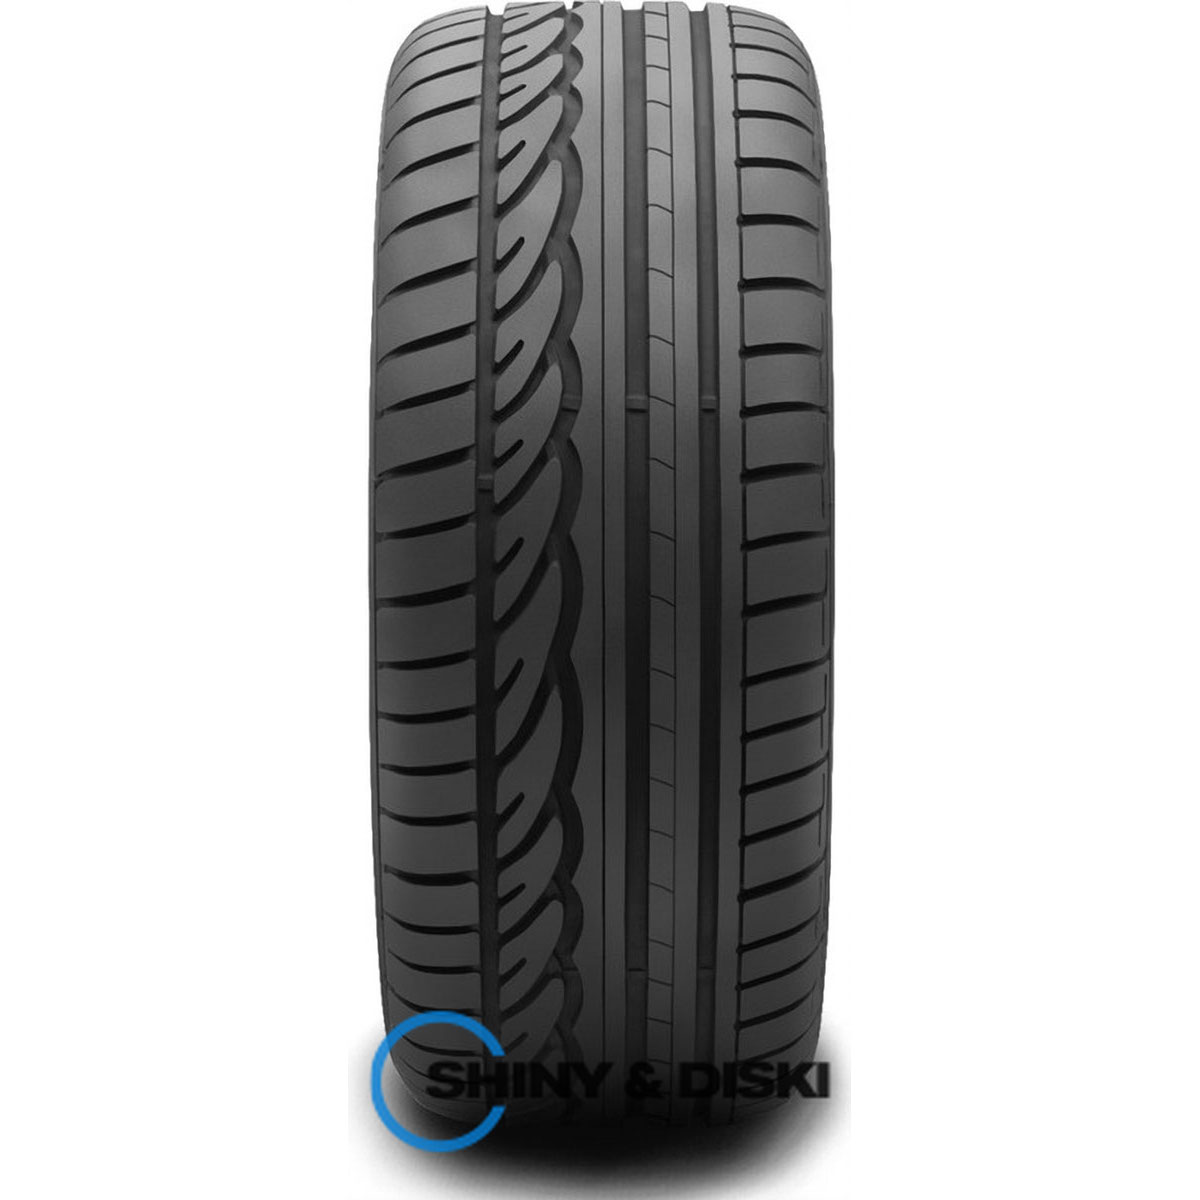 резина dunlop sp sport 01 a/s 235/50 r18 97v